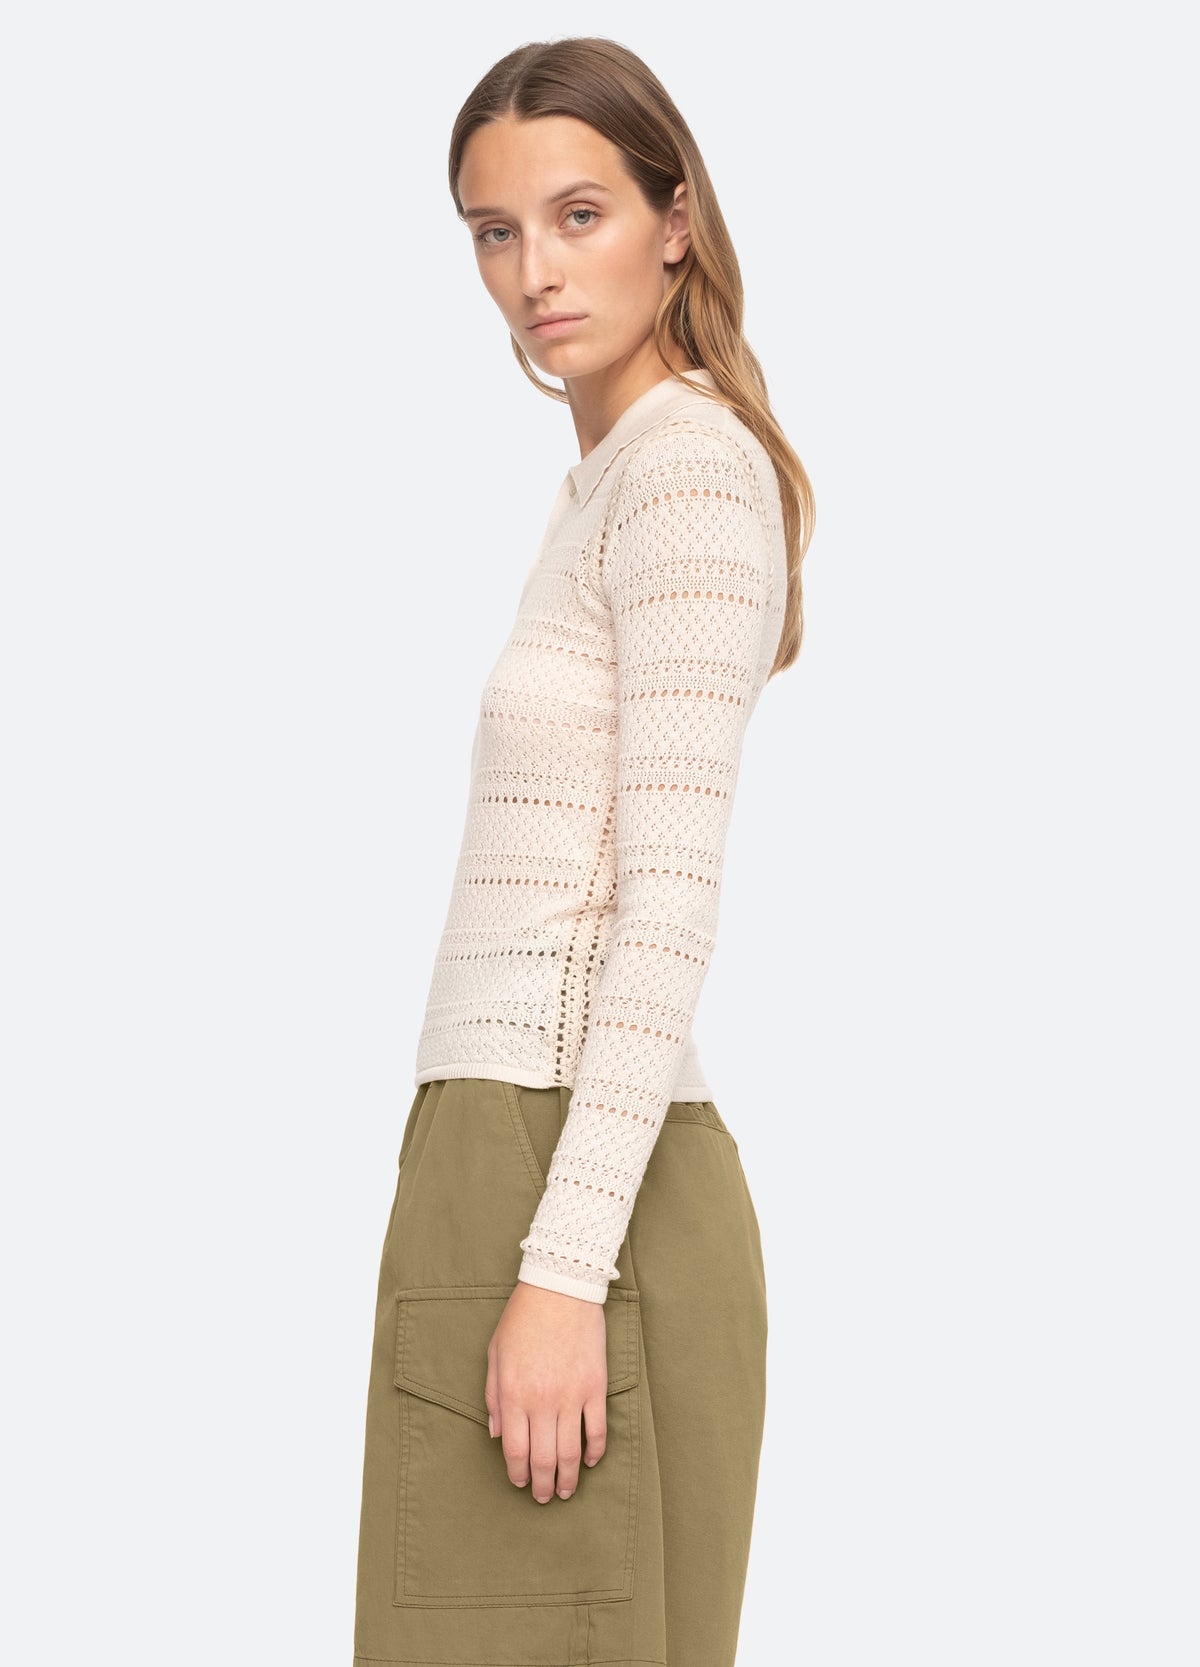 cream-syble sweater-side view - 3